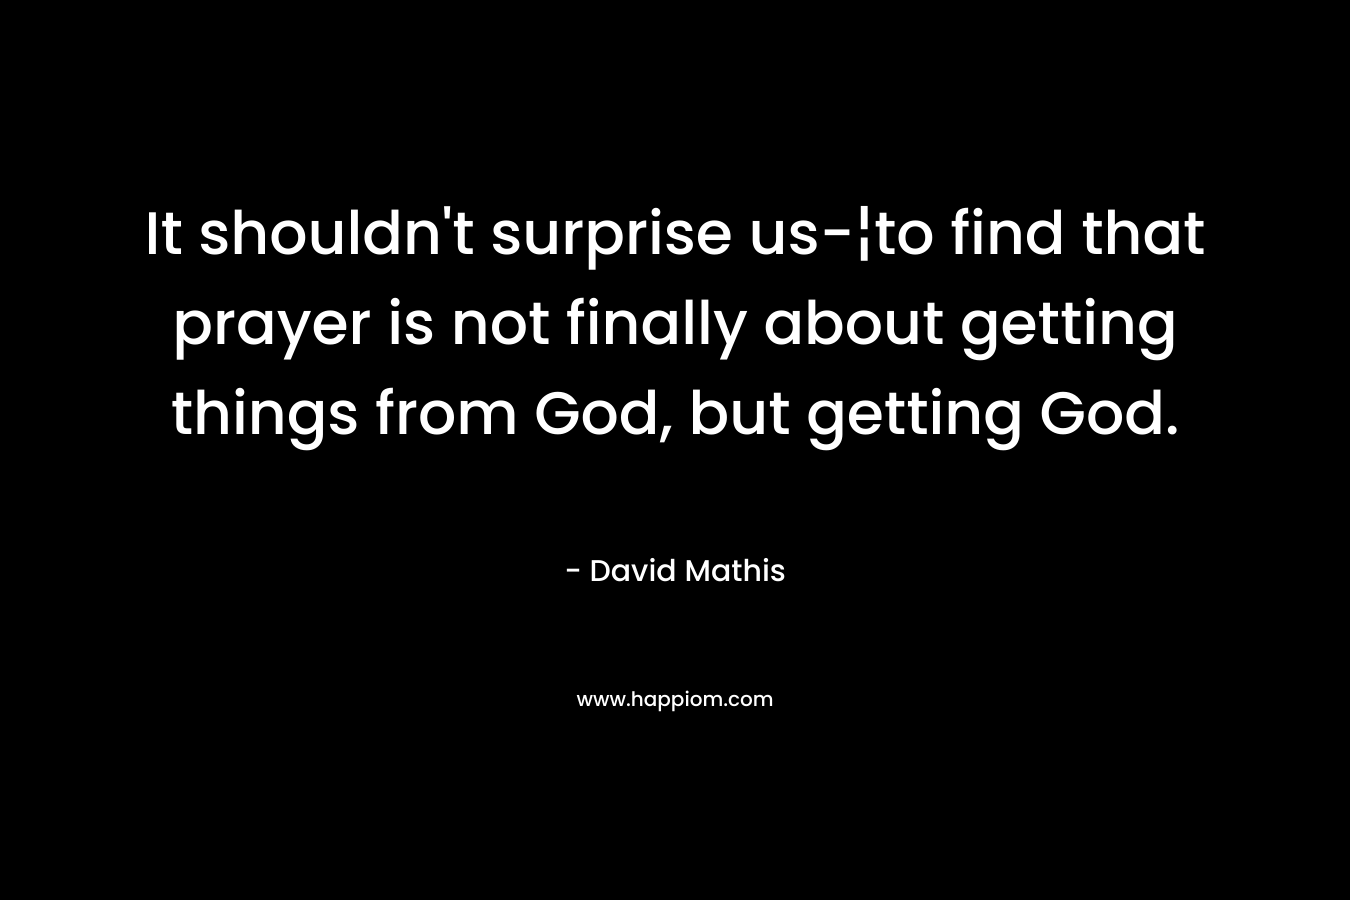 It shouldn’t surprise us-¦to find that prayer is not finally about getting things from God, but getting God. – David Mathis